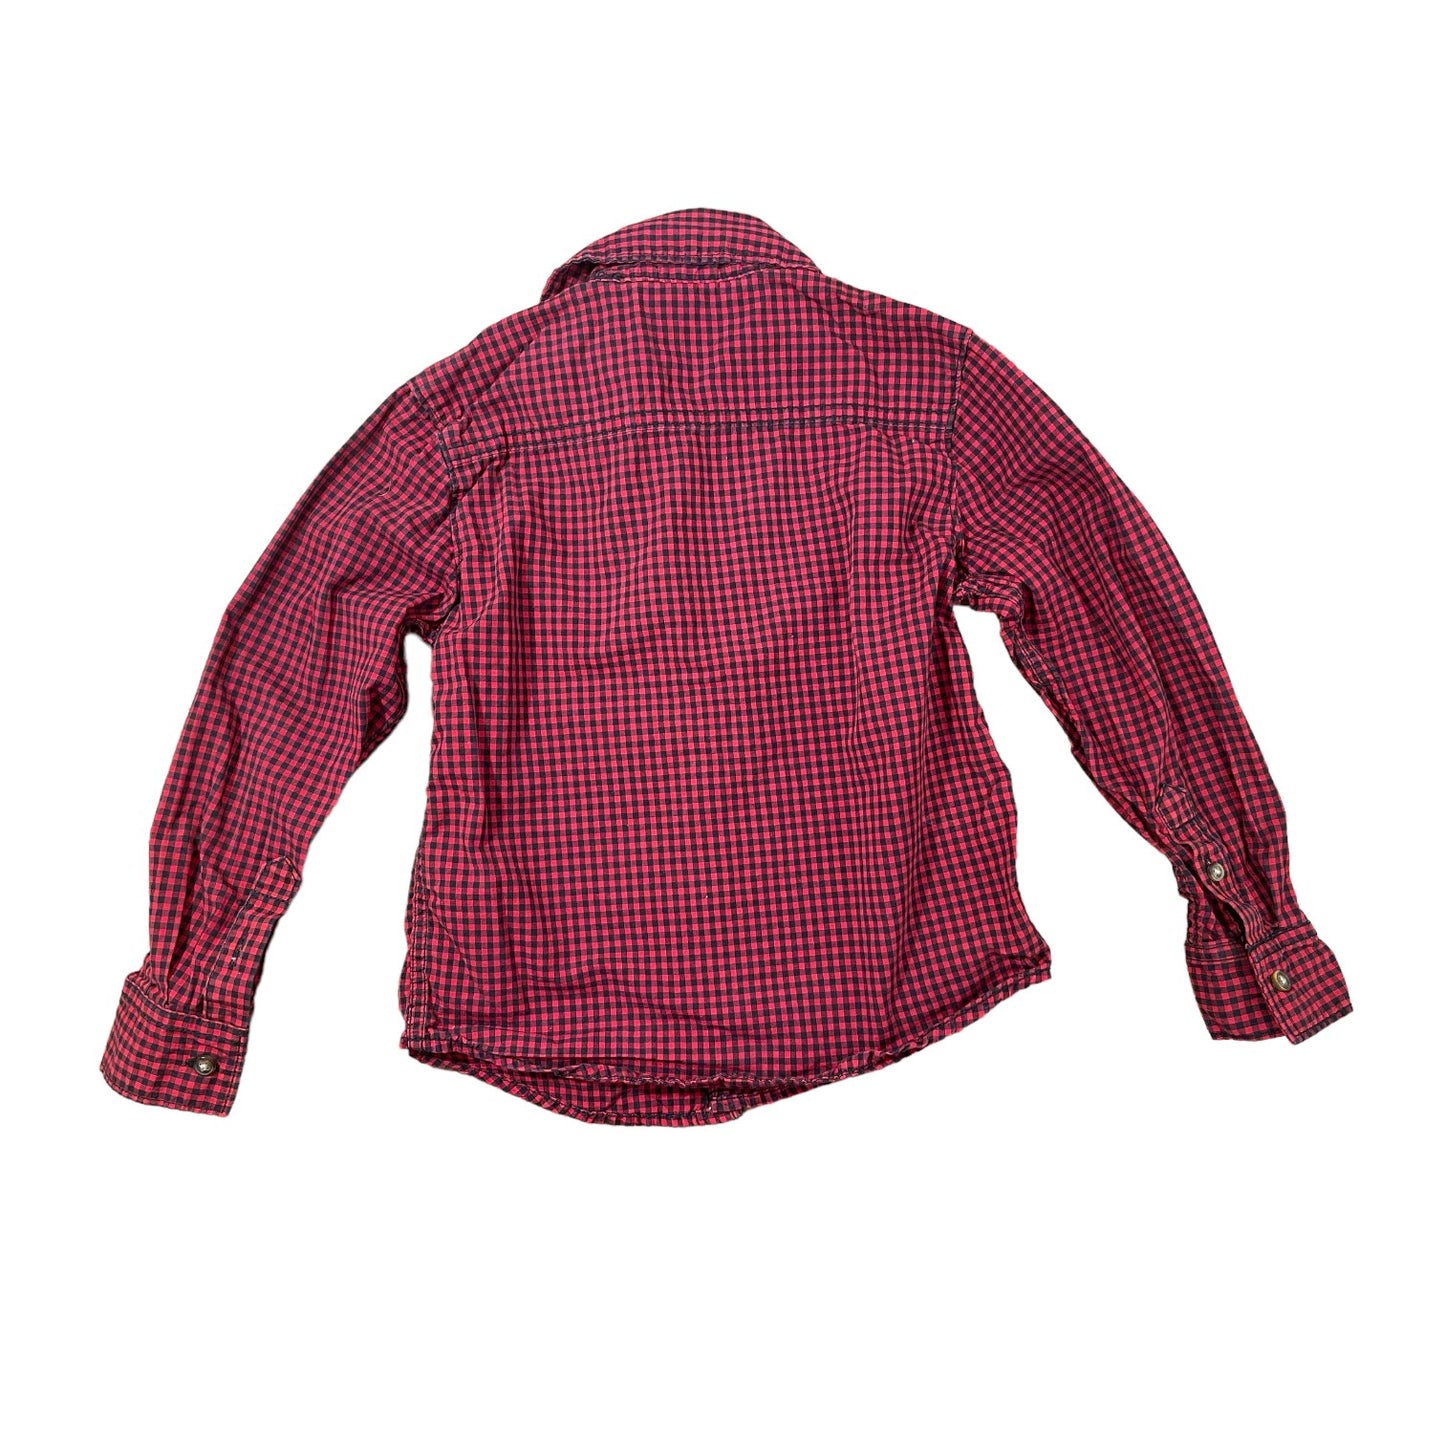 Carter's 5T Boys dress shirt red and black checkered